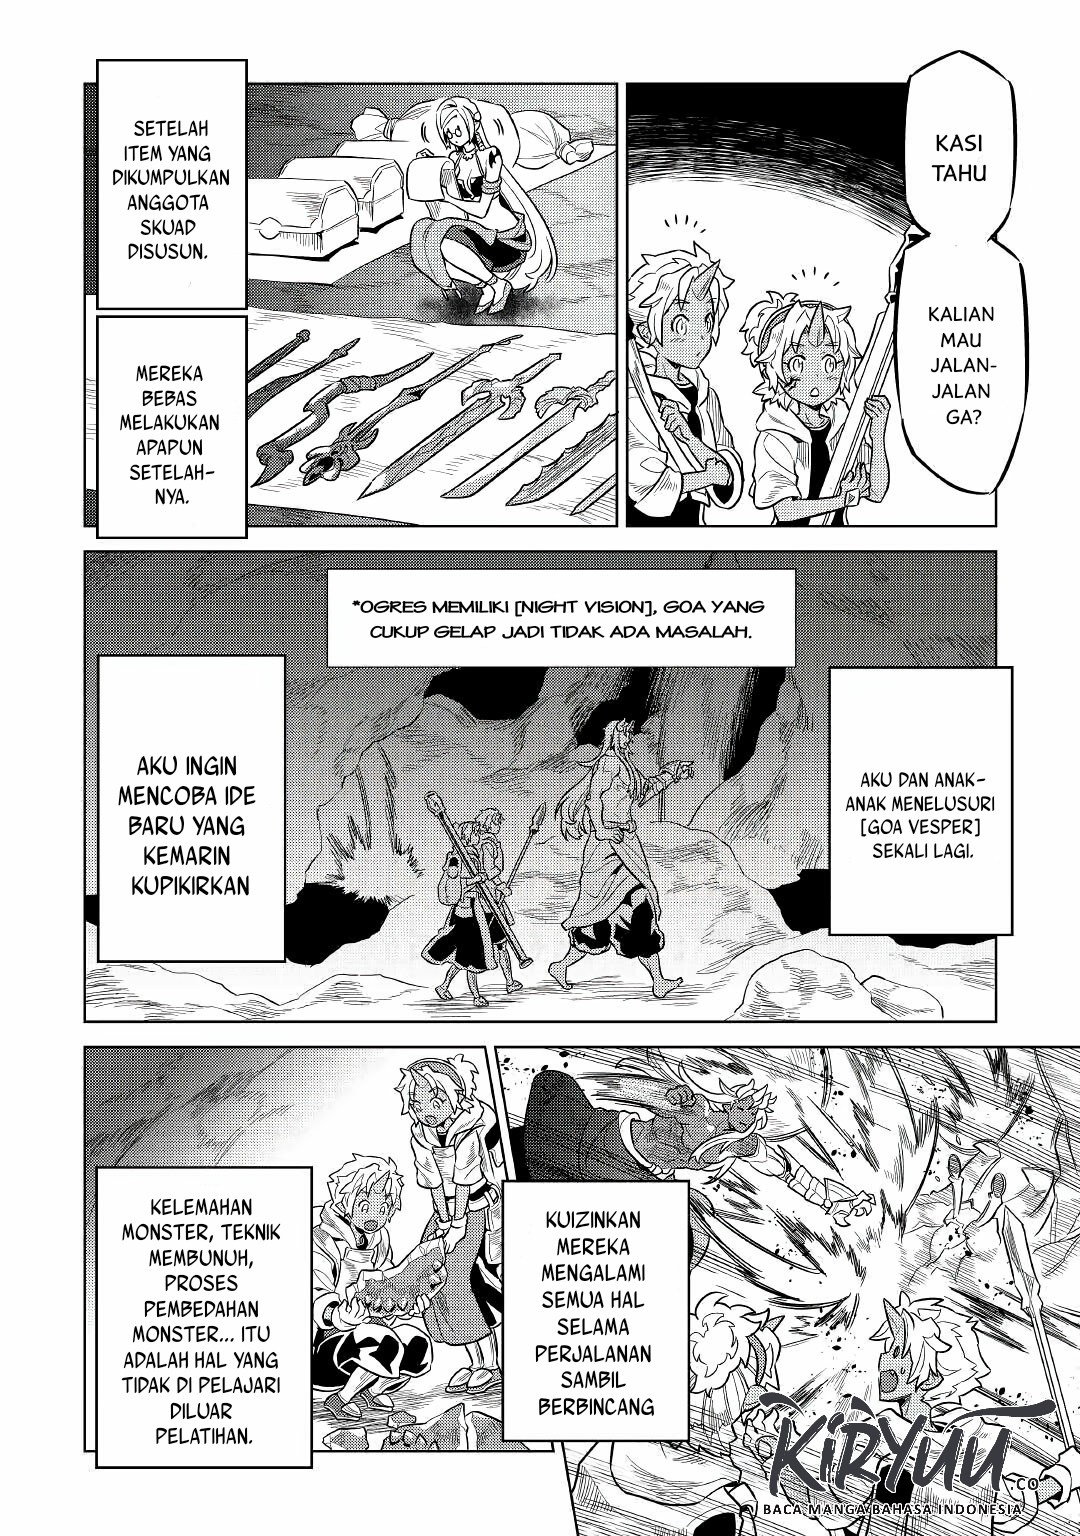 Re:Monster Chapter 65